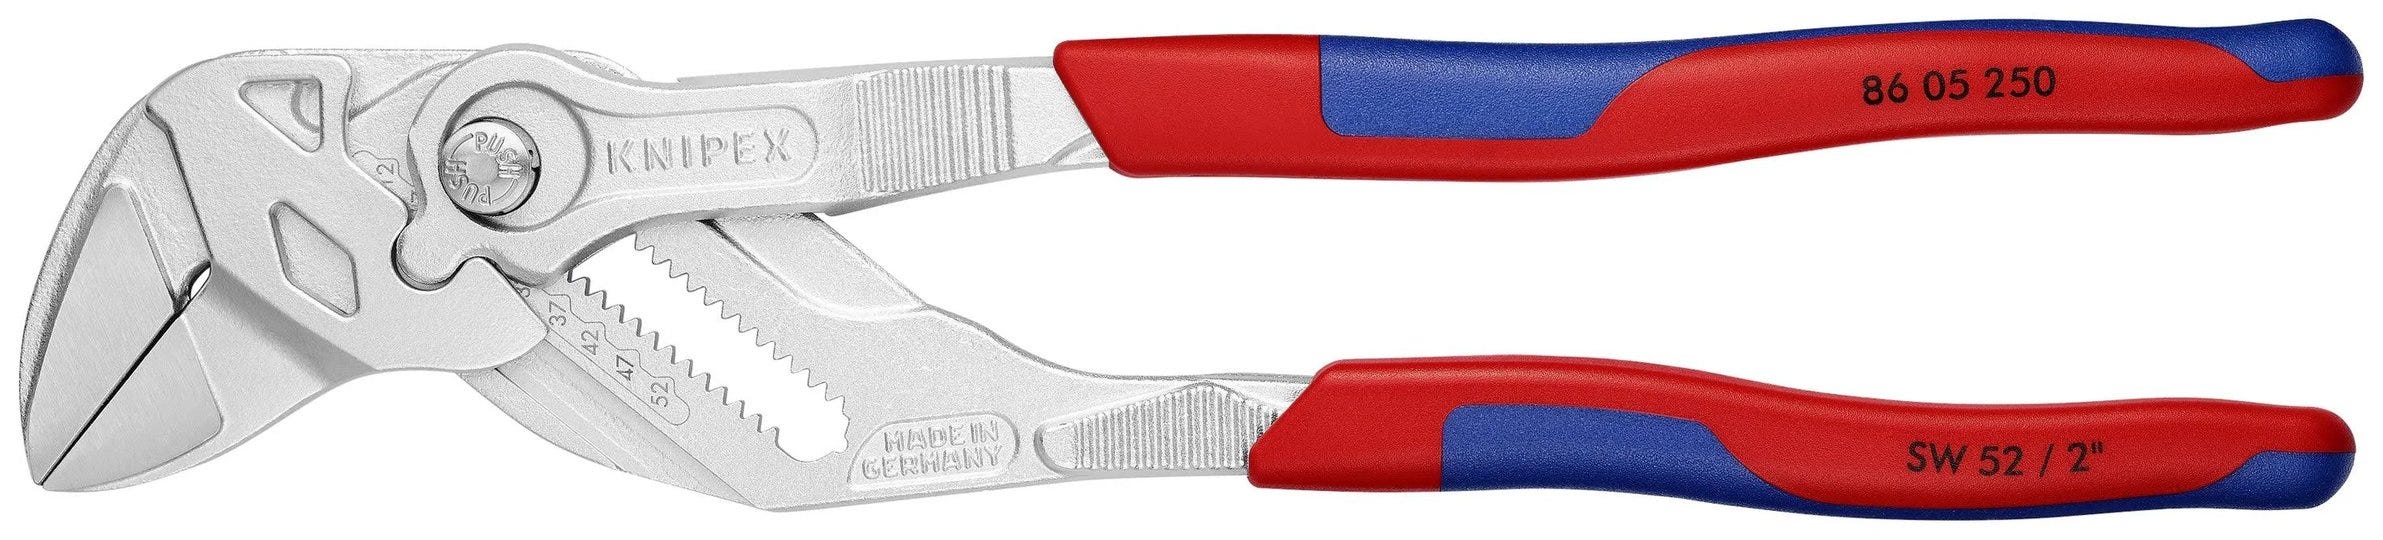 knipex-86-05-250-10-inch-pliers-wrench-comfort-grip-1